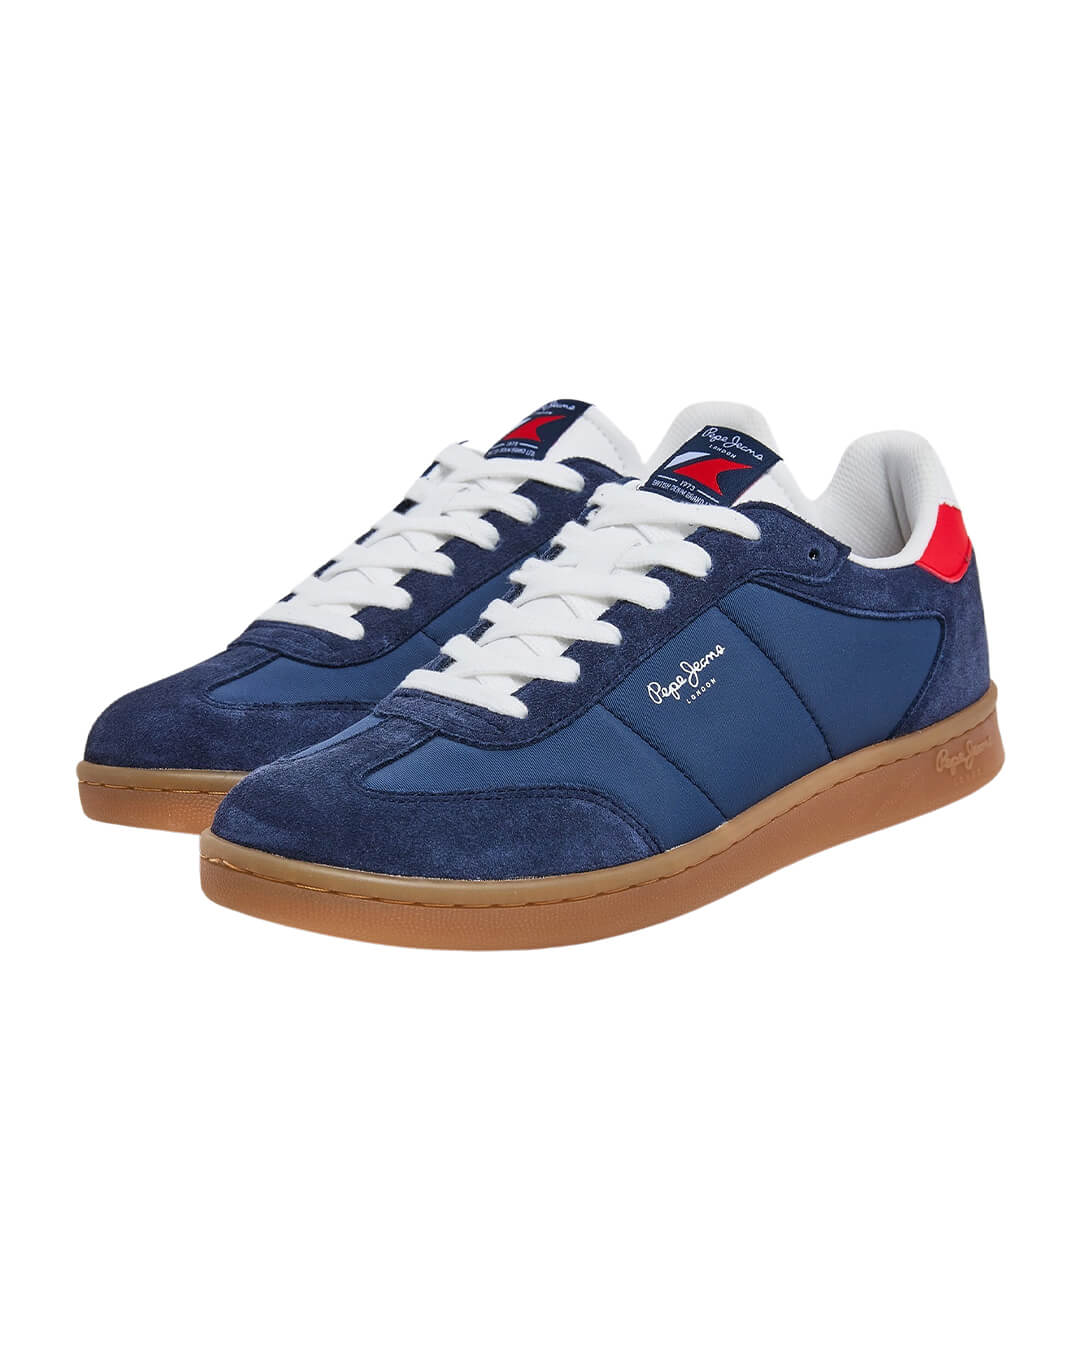 Pepe Jeans Shoes Pepe Jeans Navy Combined Classic Trainers